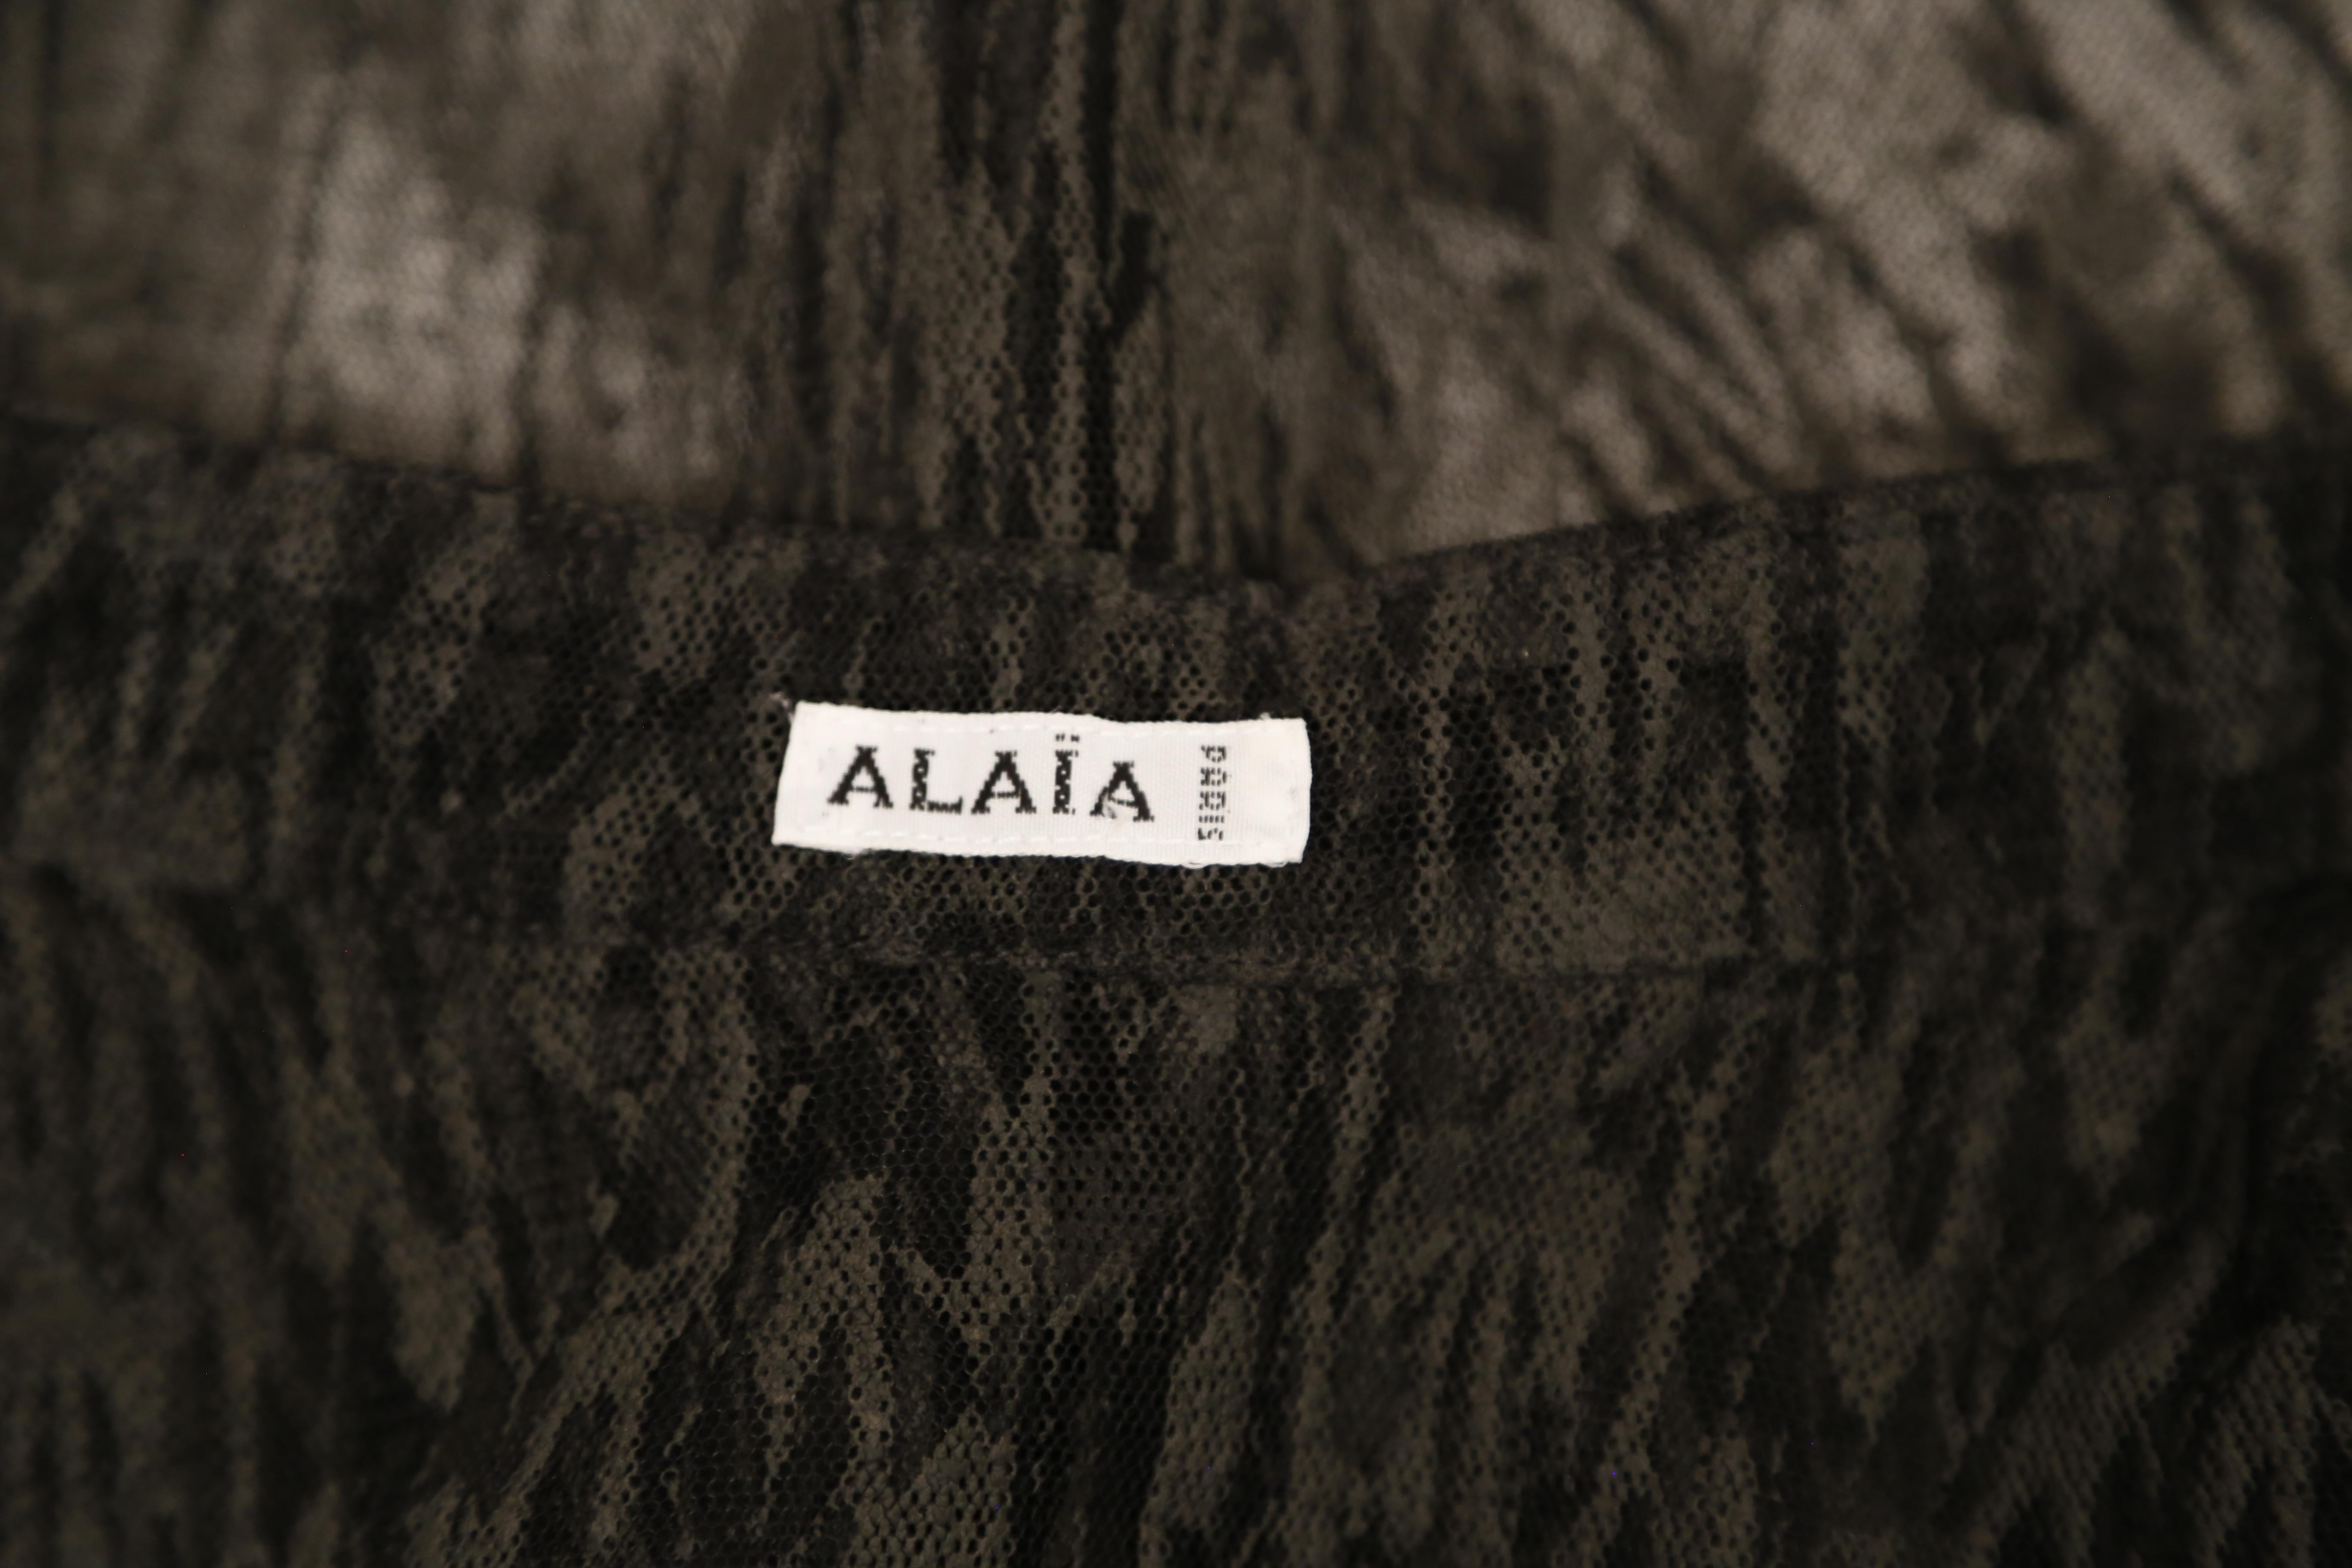 1987 AZZEDINE ALAIA black textured net RUNWAY button up shirt In Excellent Condition For Sale In San Fransisco, CA